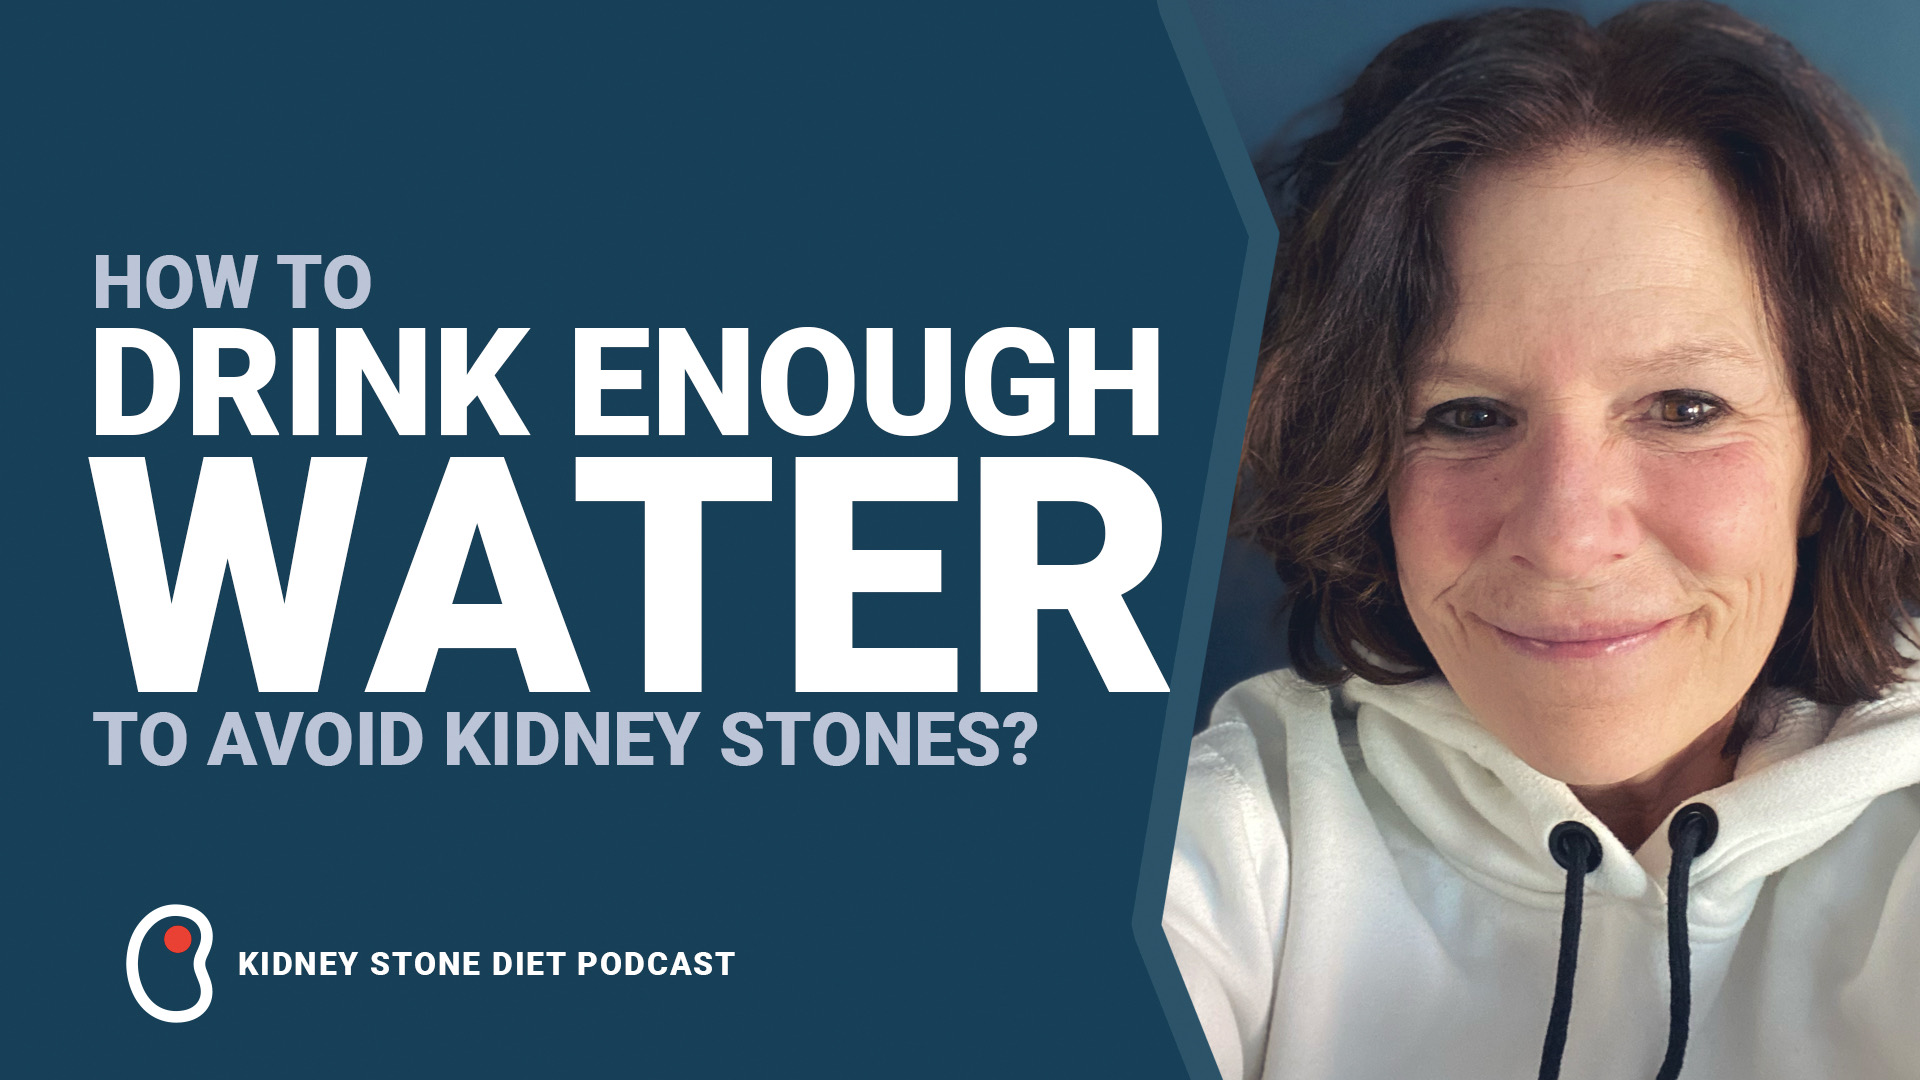 How to drink enough water to avoid kidney stones?